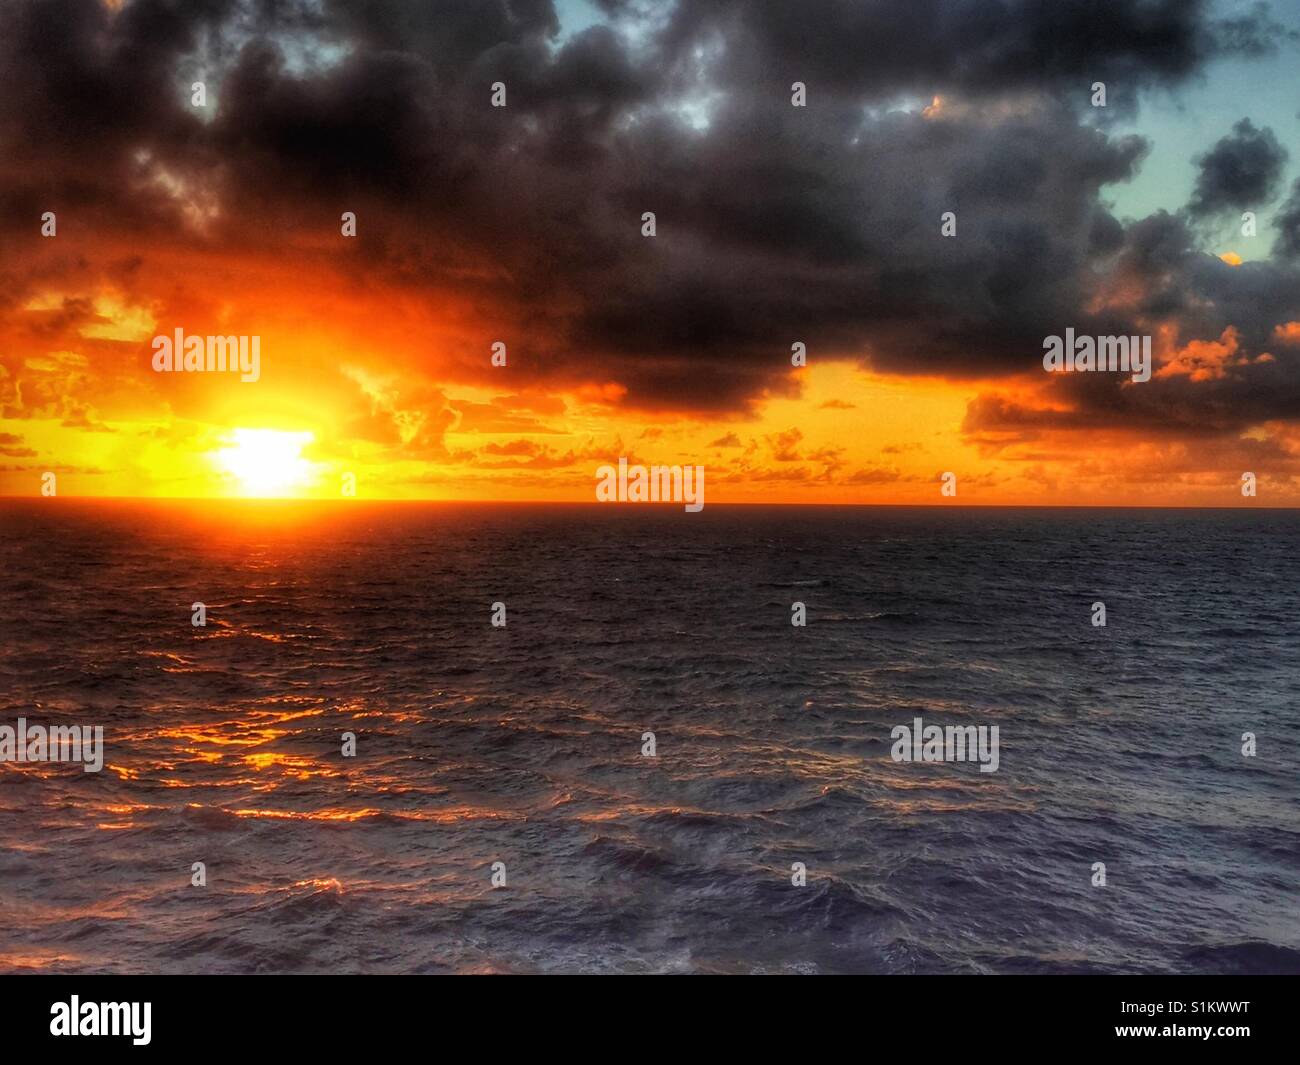 Sun peeks up over the Pacific Ocean for stunning sunrise on a cloudy day. Moody sunrise seascape. Ocean lit by rising sun on horizon. Stock Photo